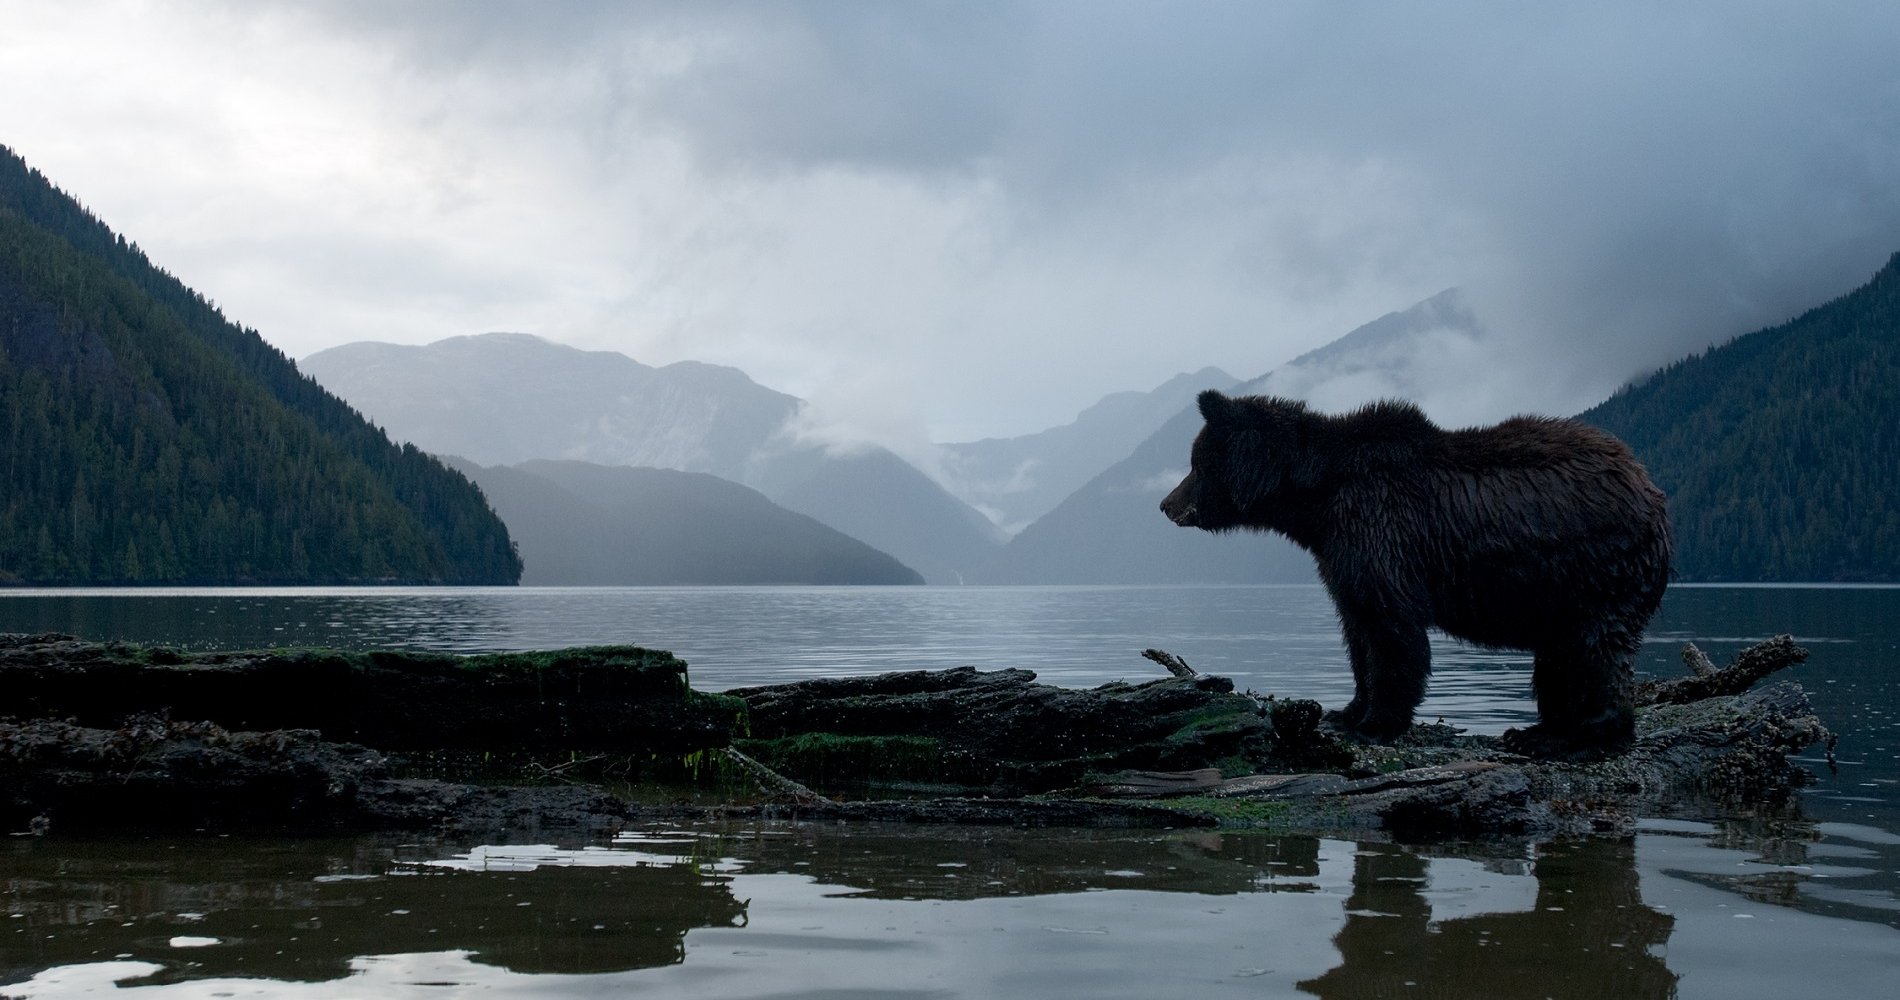 The silhouette of a grizzly bear standing on the shoreline with water and mountains behind. The sky is cloudy and getting dark.